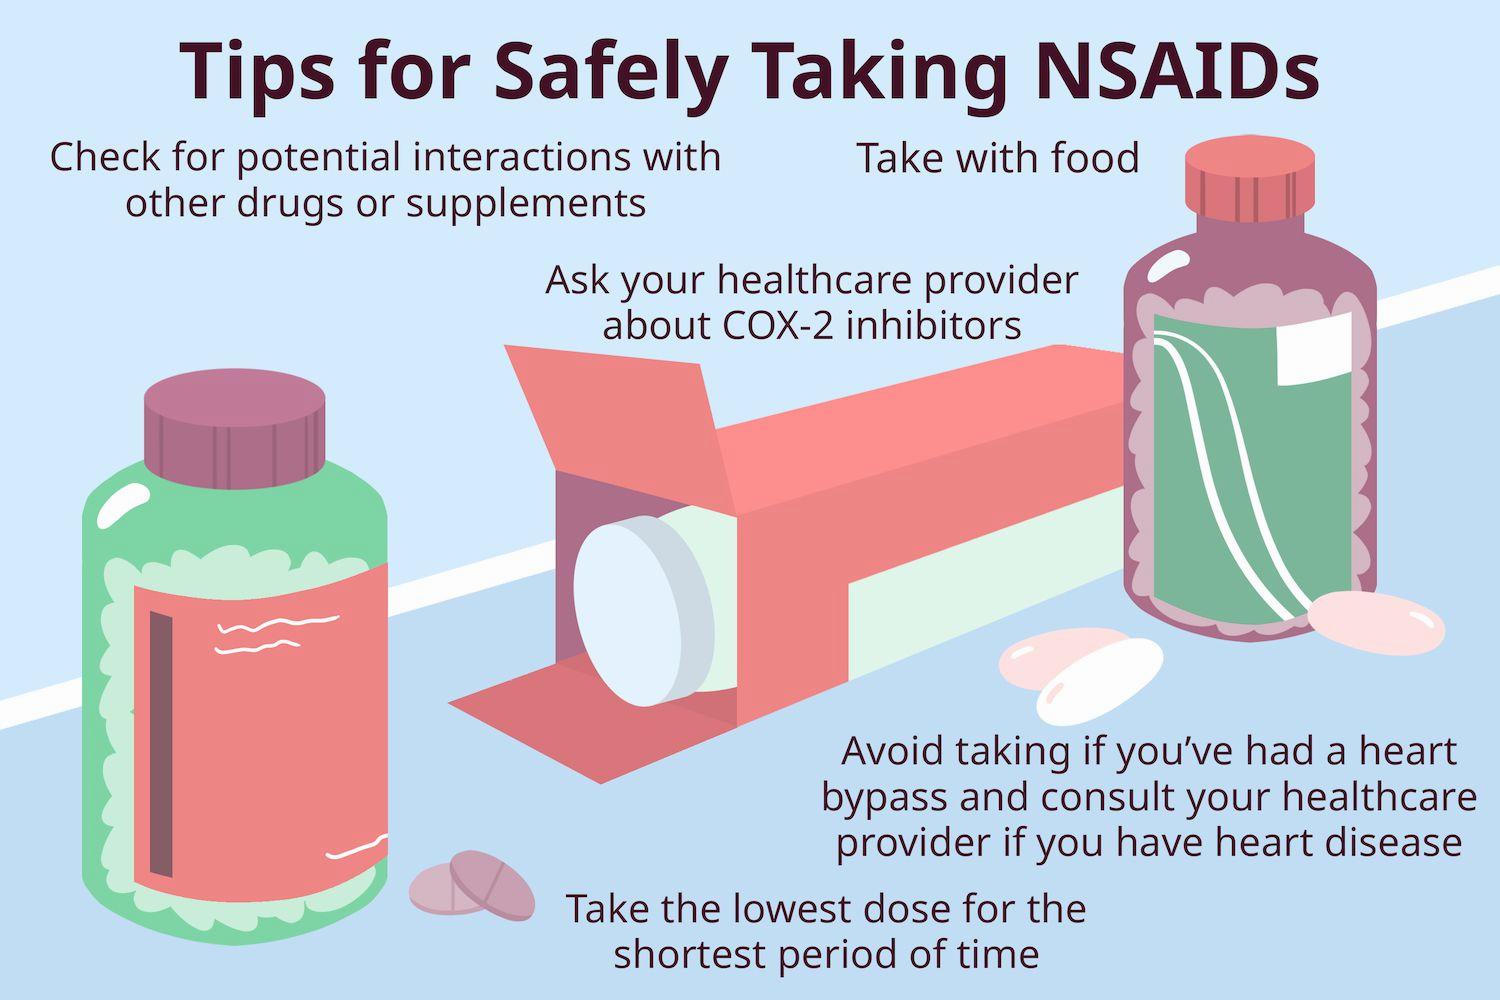 A list of tips for safely taking NSAIDs, including checking for potential interactions with other drugs or supplements, taking with food, asking a healthcare provider about COX-2 inhibitors, avoiding taking if youve had a heart bypass and consulting your healthcare provider if you have heart disease, and taking the lowest dose for the shortest period of time.